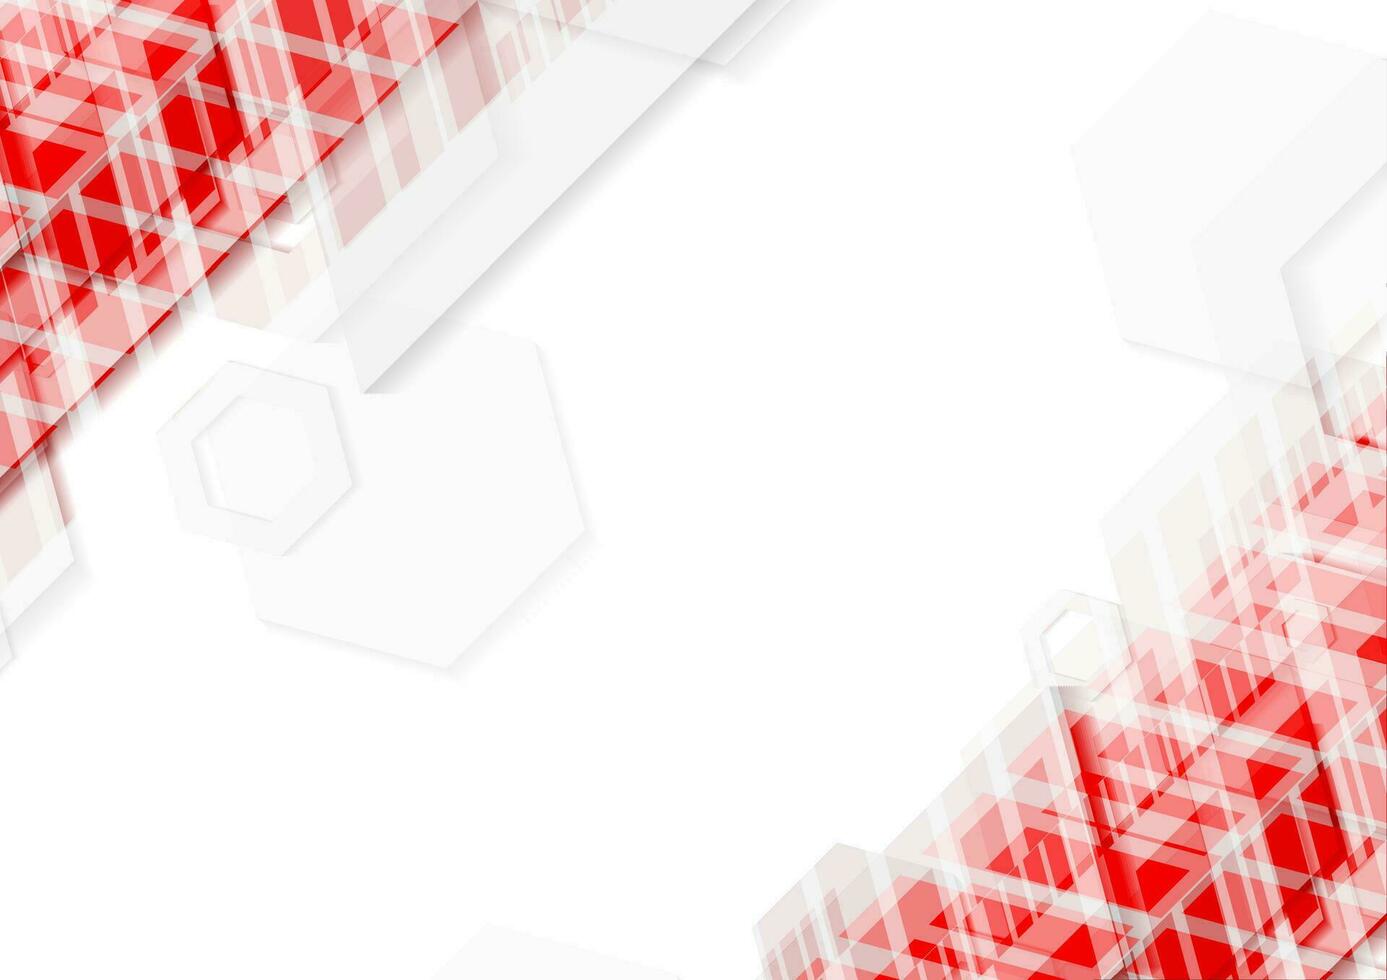 Bright red and white abstract technology background vector